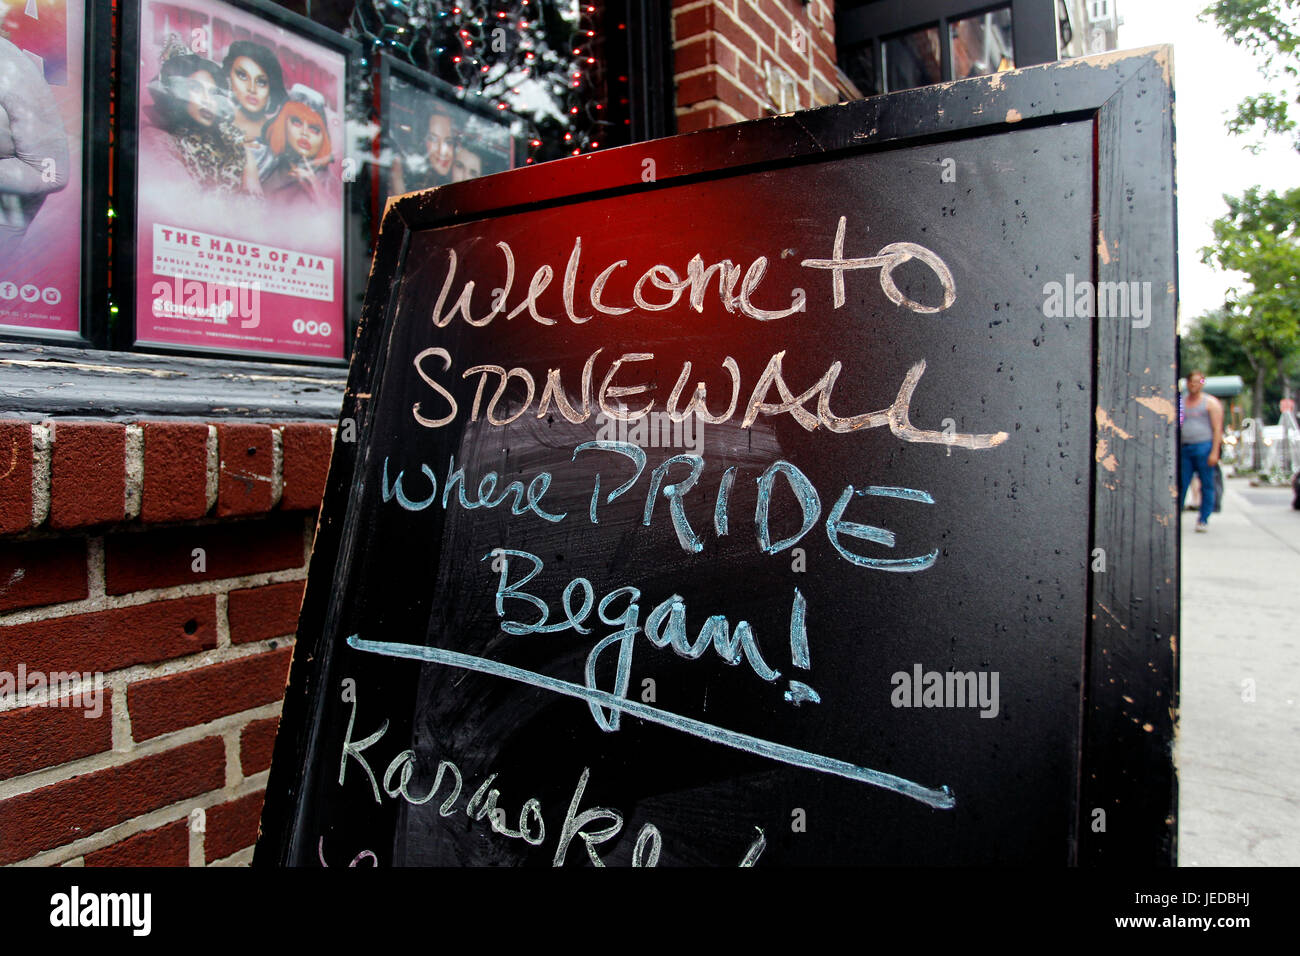 New York, USA. 23rd June, 2017. The Stonewall Inn in New York City's Greenwich Village where the Gay Pride movement was born, following a series of demonstrations in response to a police raid of the bar in 1969.  People are flocking to the site, now a National Monument, as Gay Pride events get underway in New York City this weekend, including Sunday's Pride march. Credit: Adam Stoltman/Alamy Live News Stock Photo